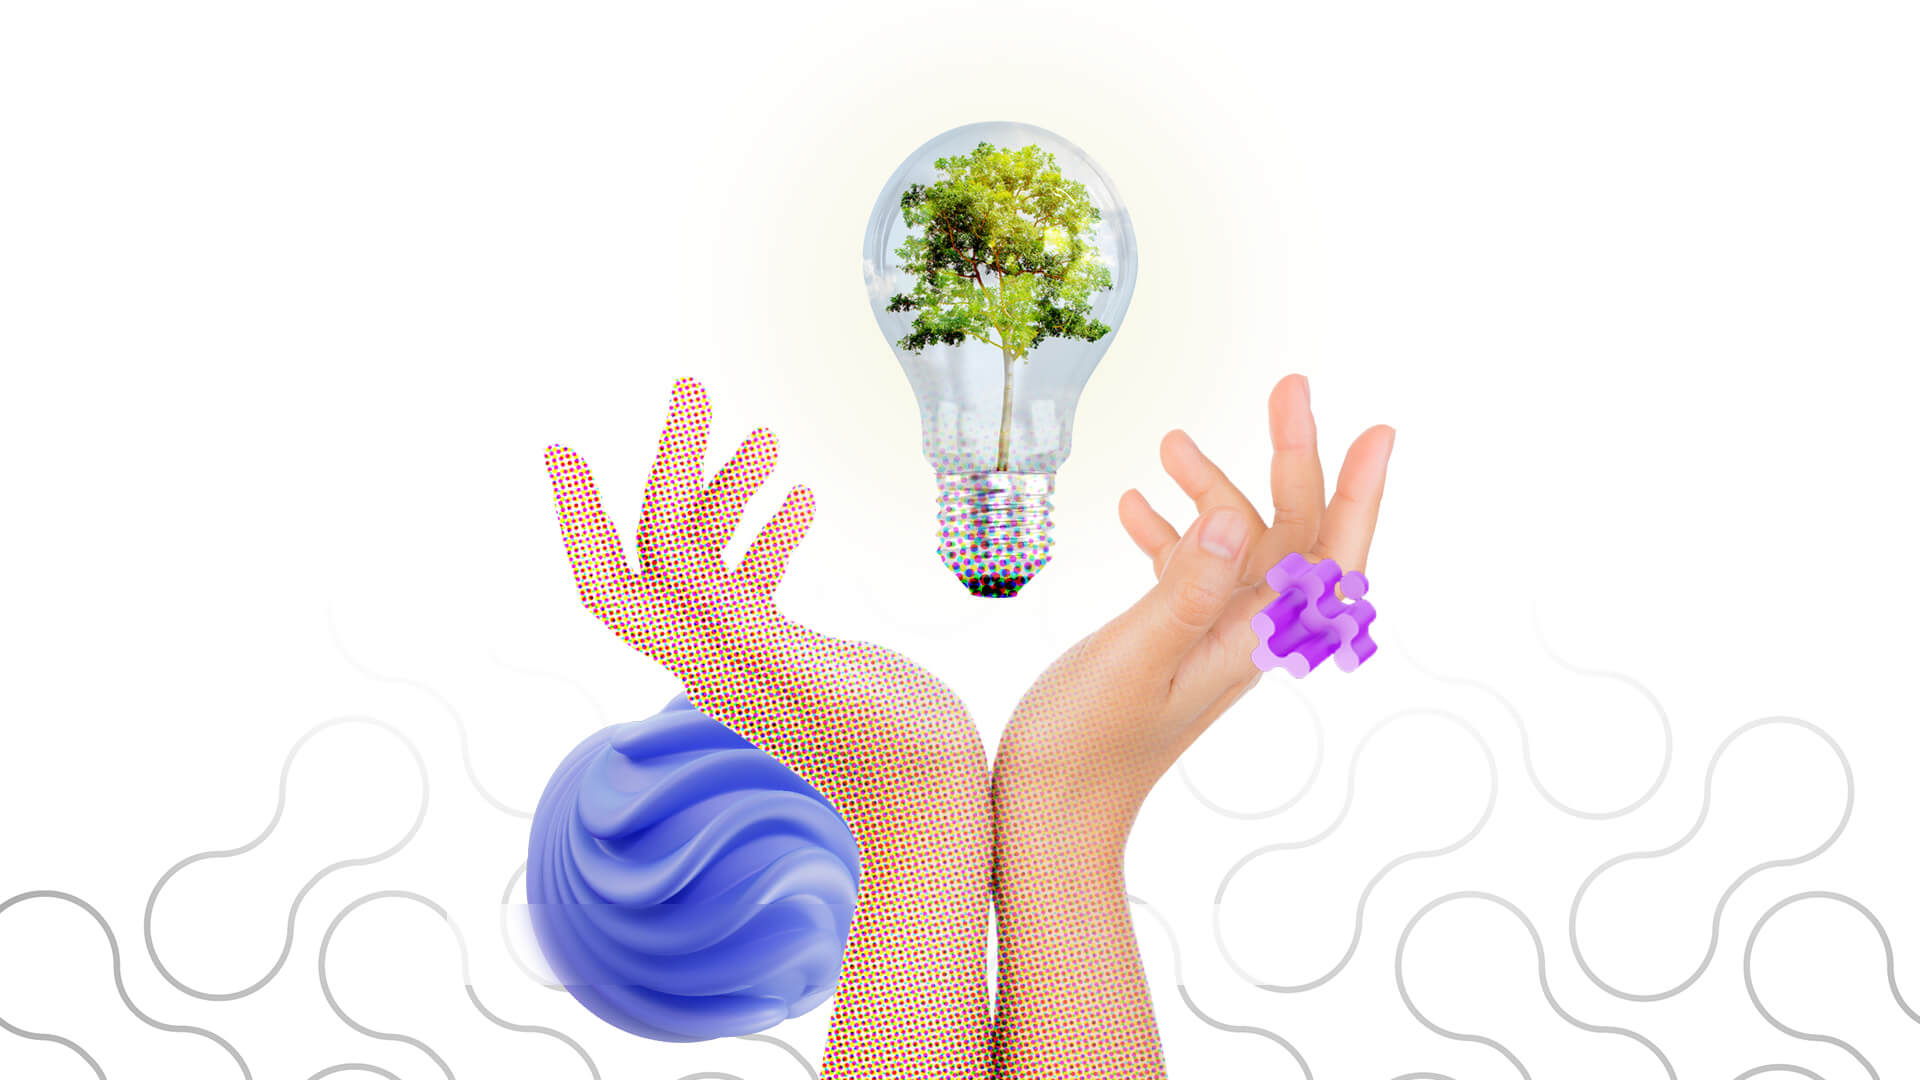 Why Are We Lacking Fresh Ideas For Creative Projects ideas icon illustration with white background and green plant in the lamp